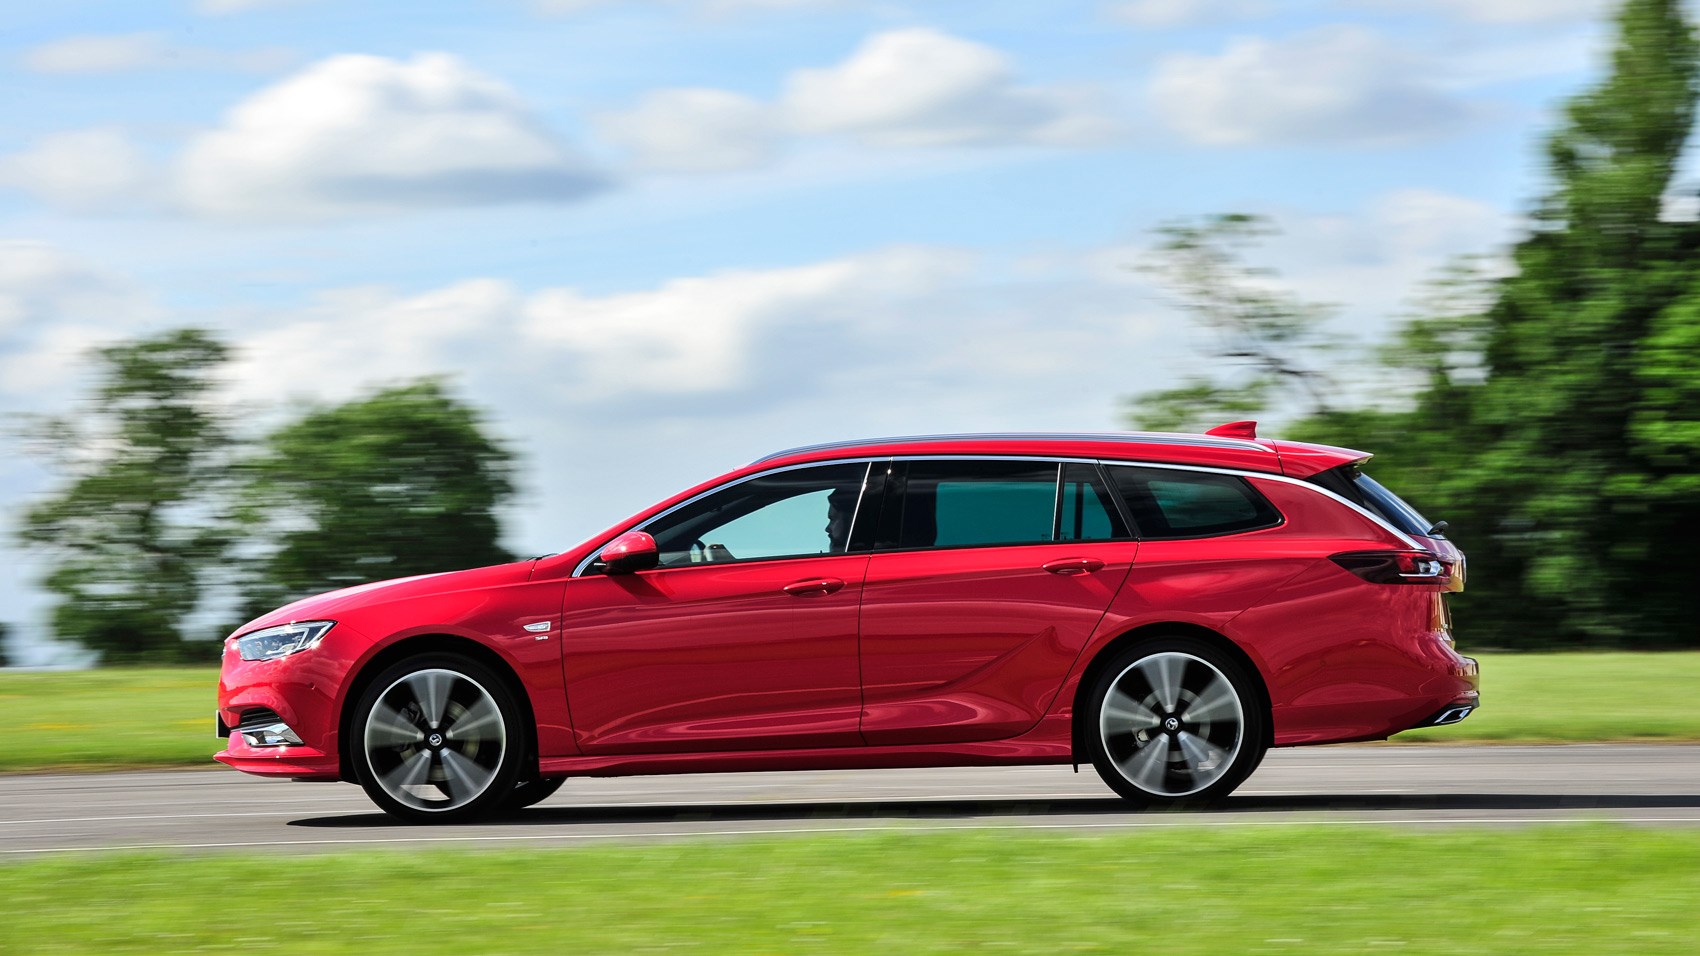 Vauxhall Insignia Sports Tourer side panning